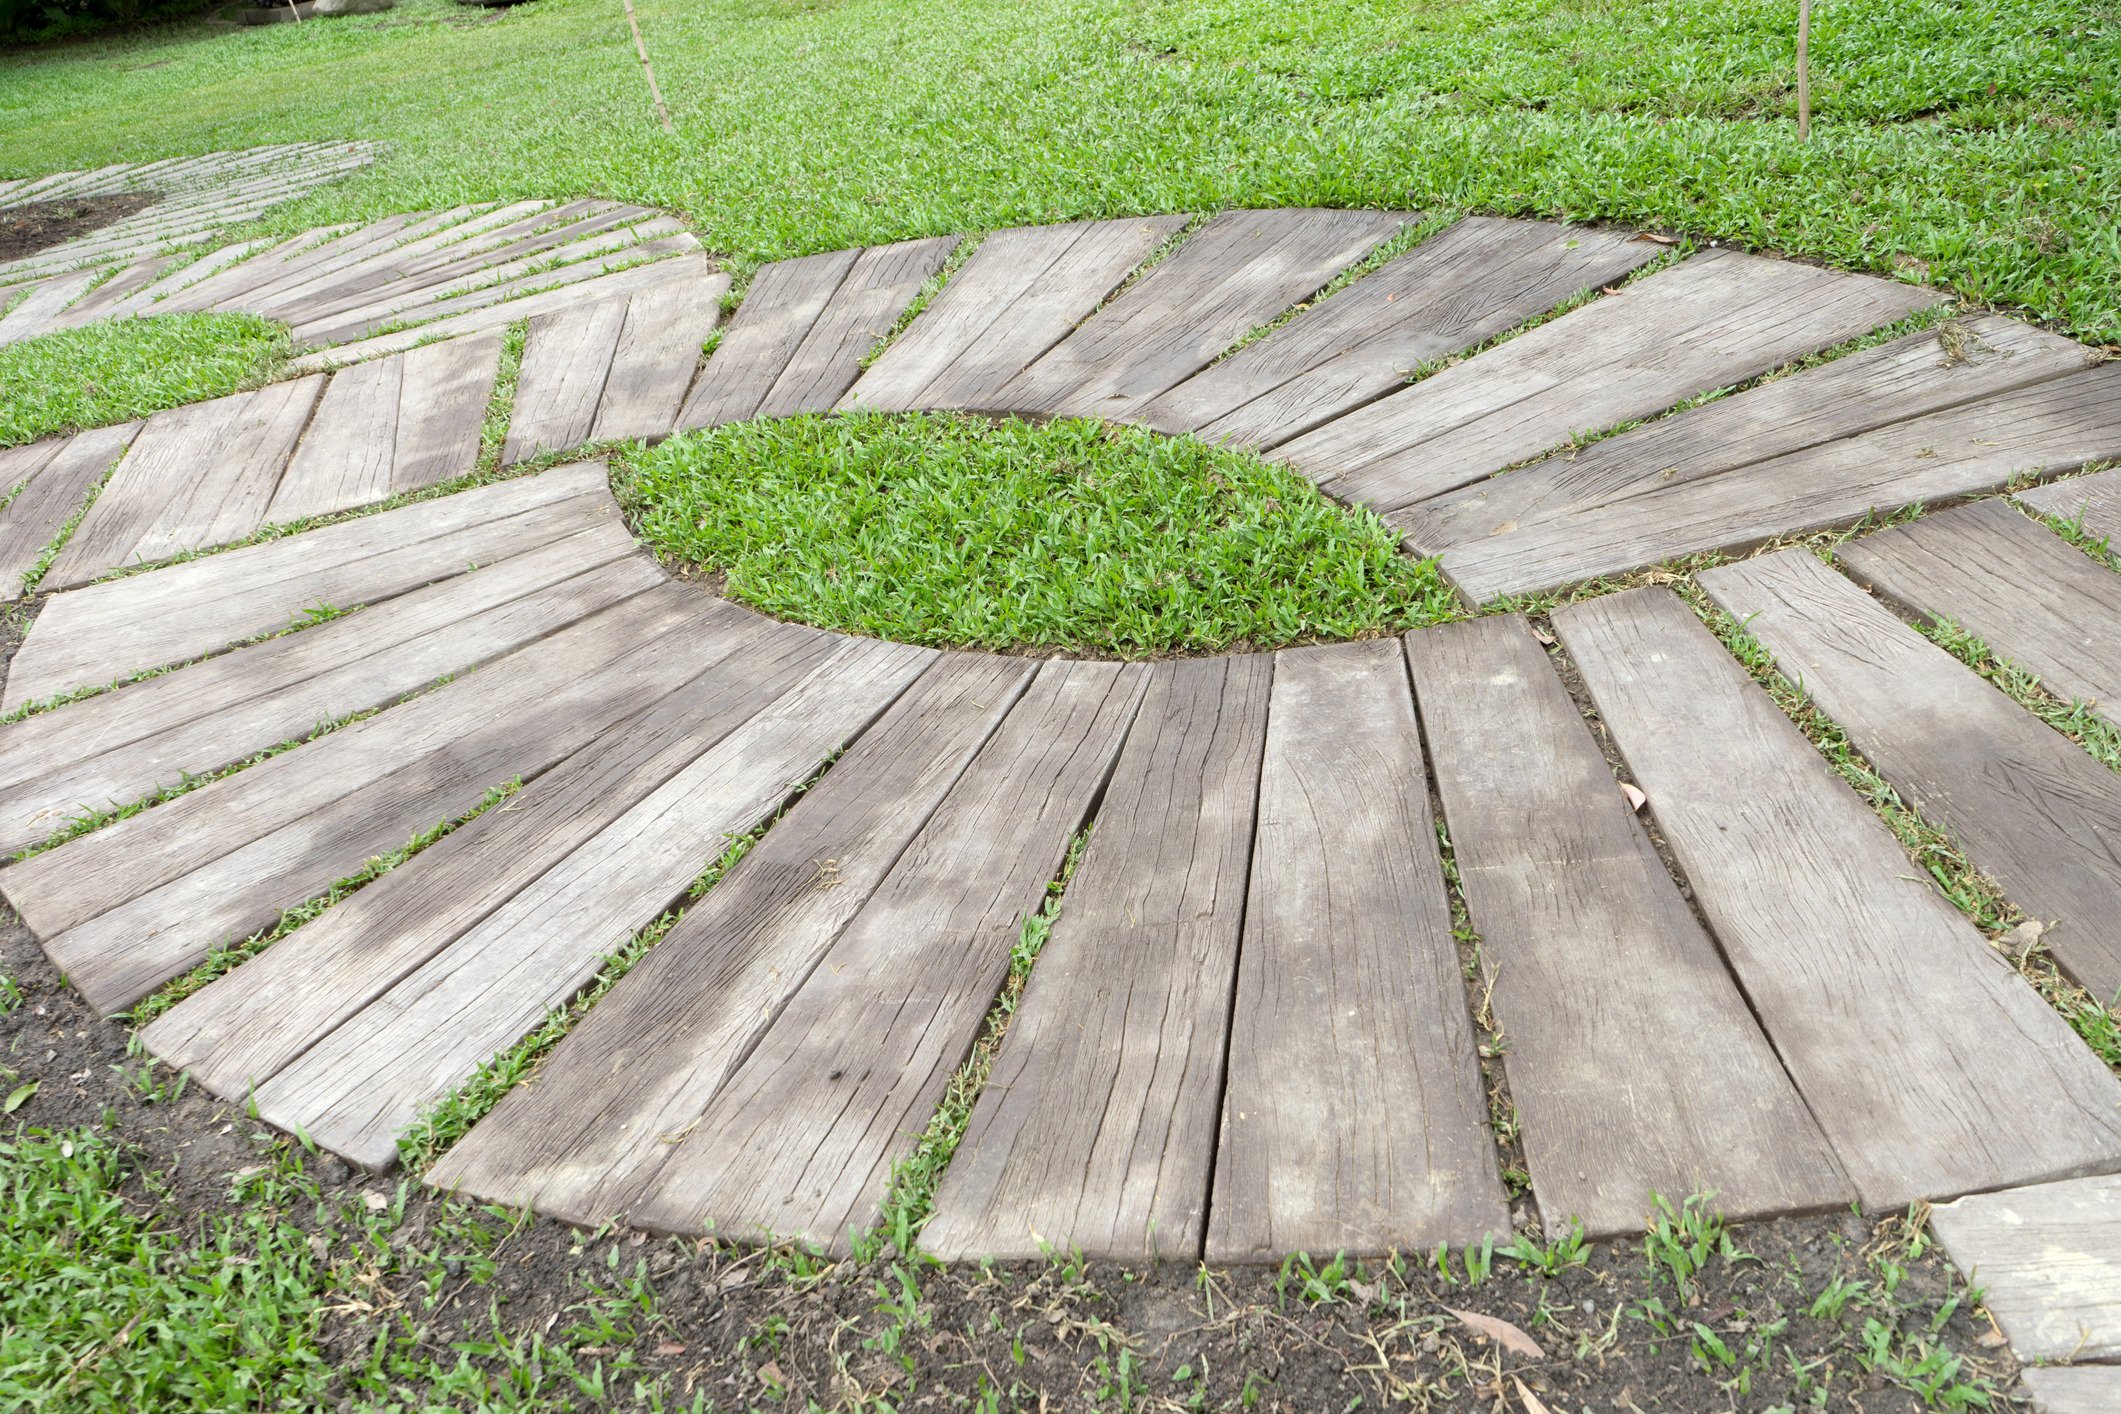 Wooden planks in walkway on grass